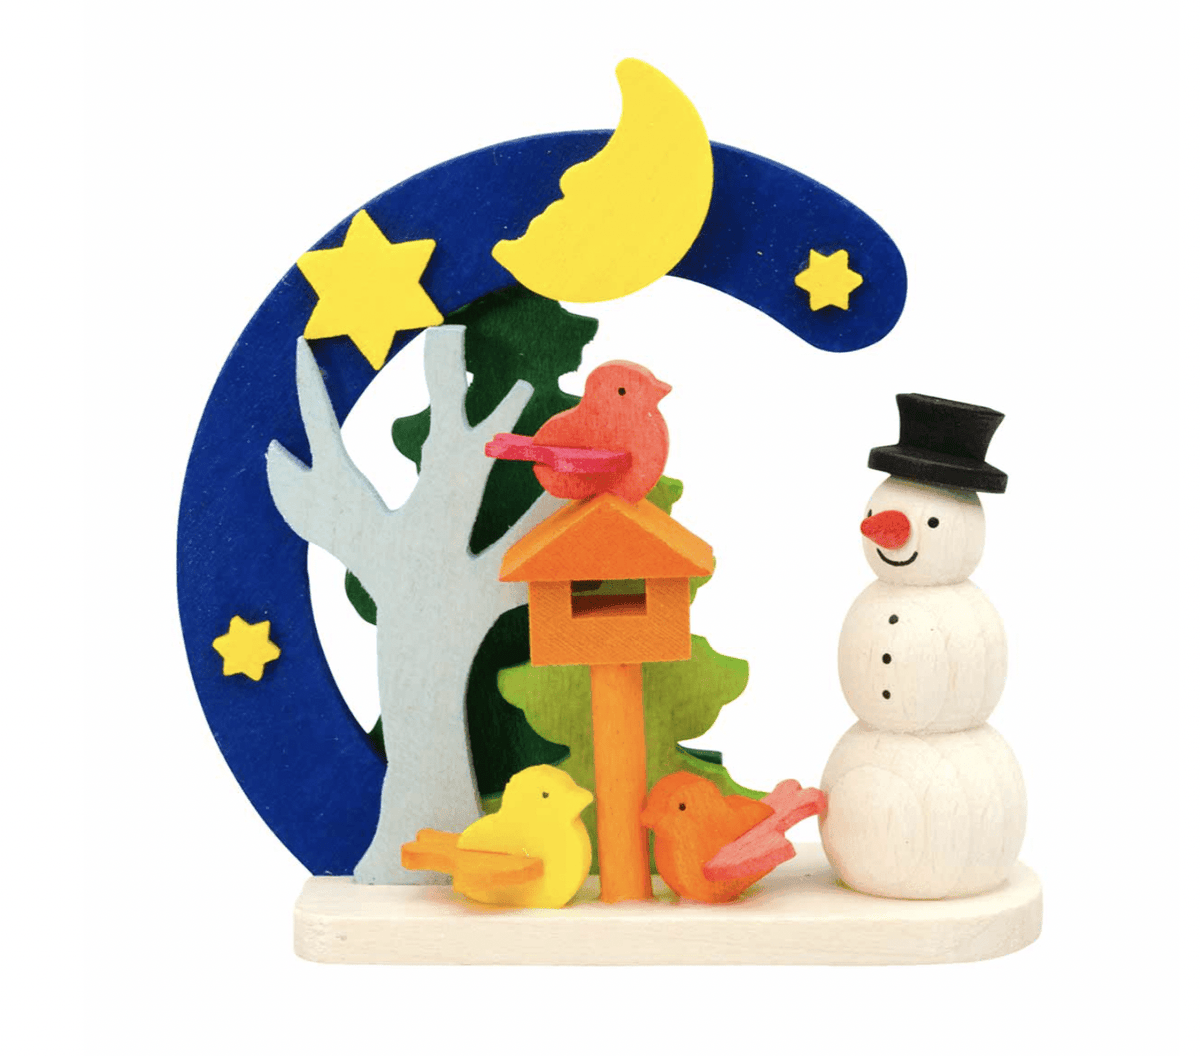 The Curated Parcel - Graupner // Christmas Tree Ornament Snowman Arch 